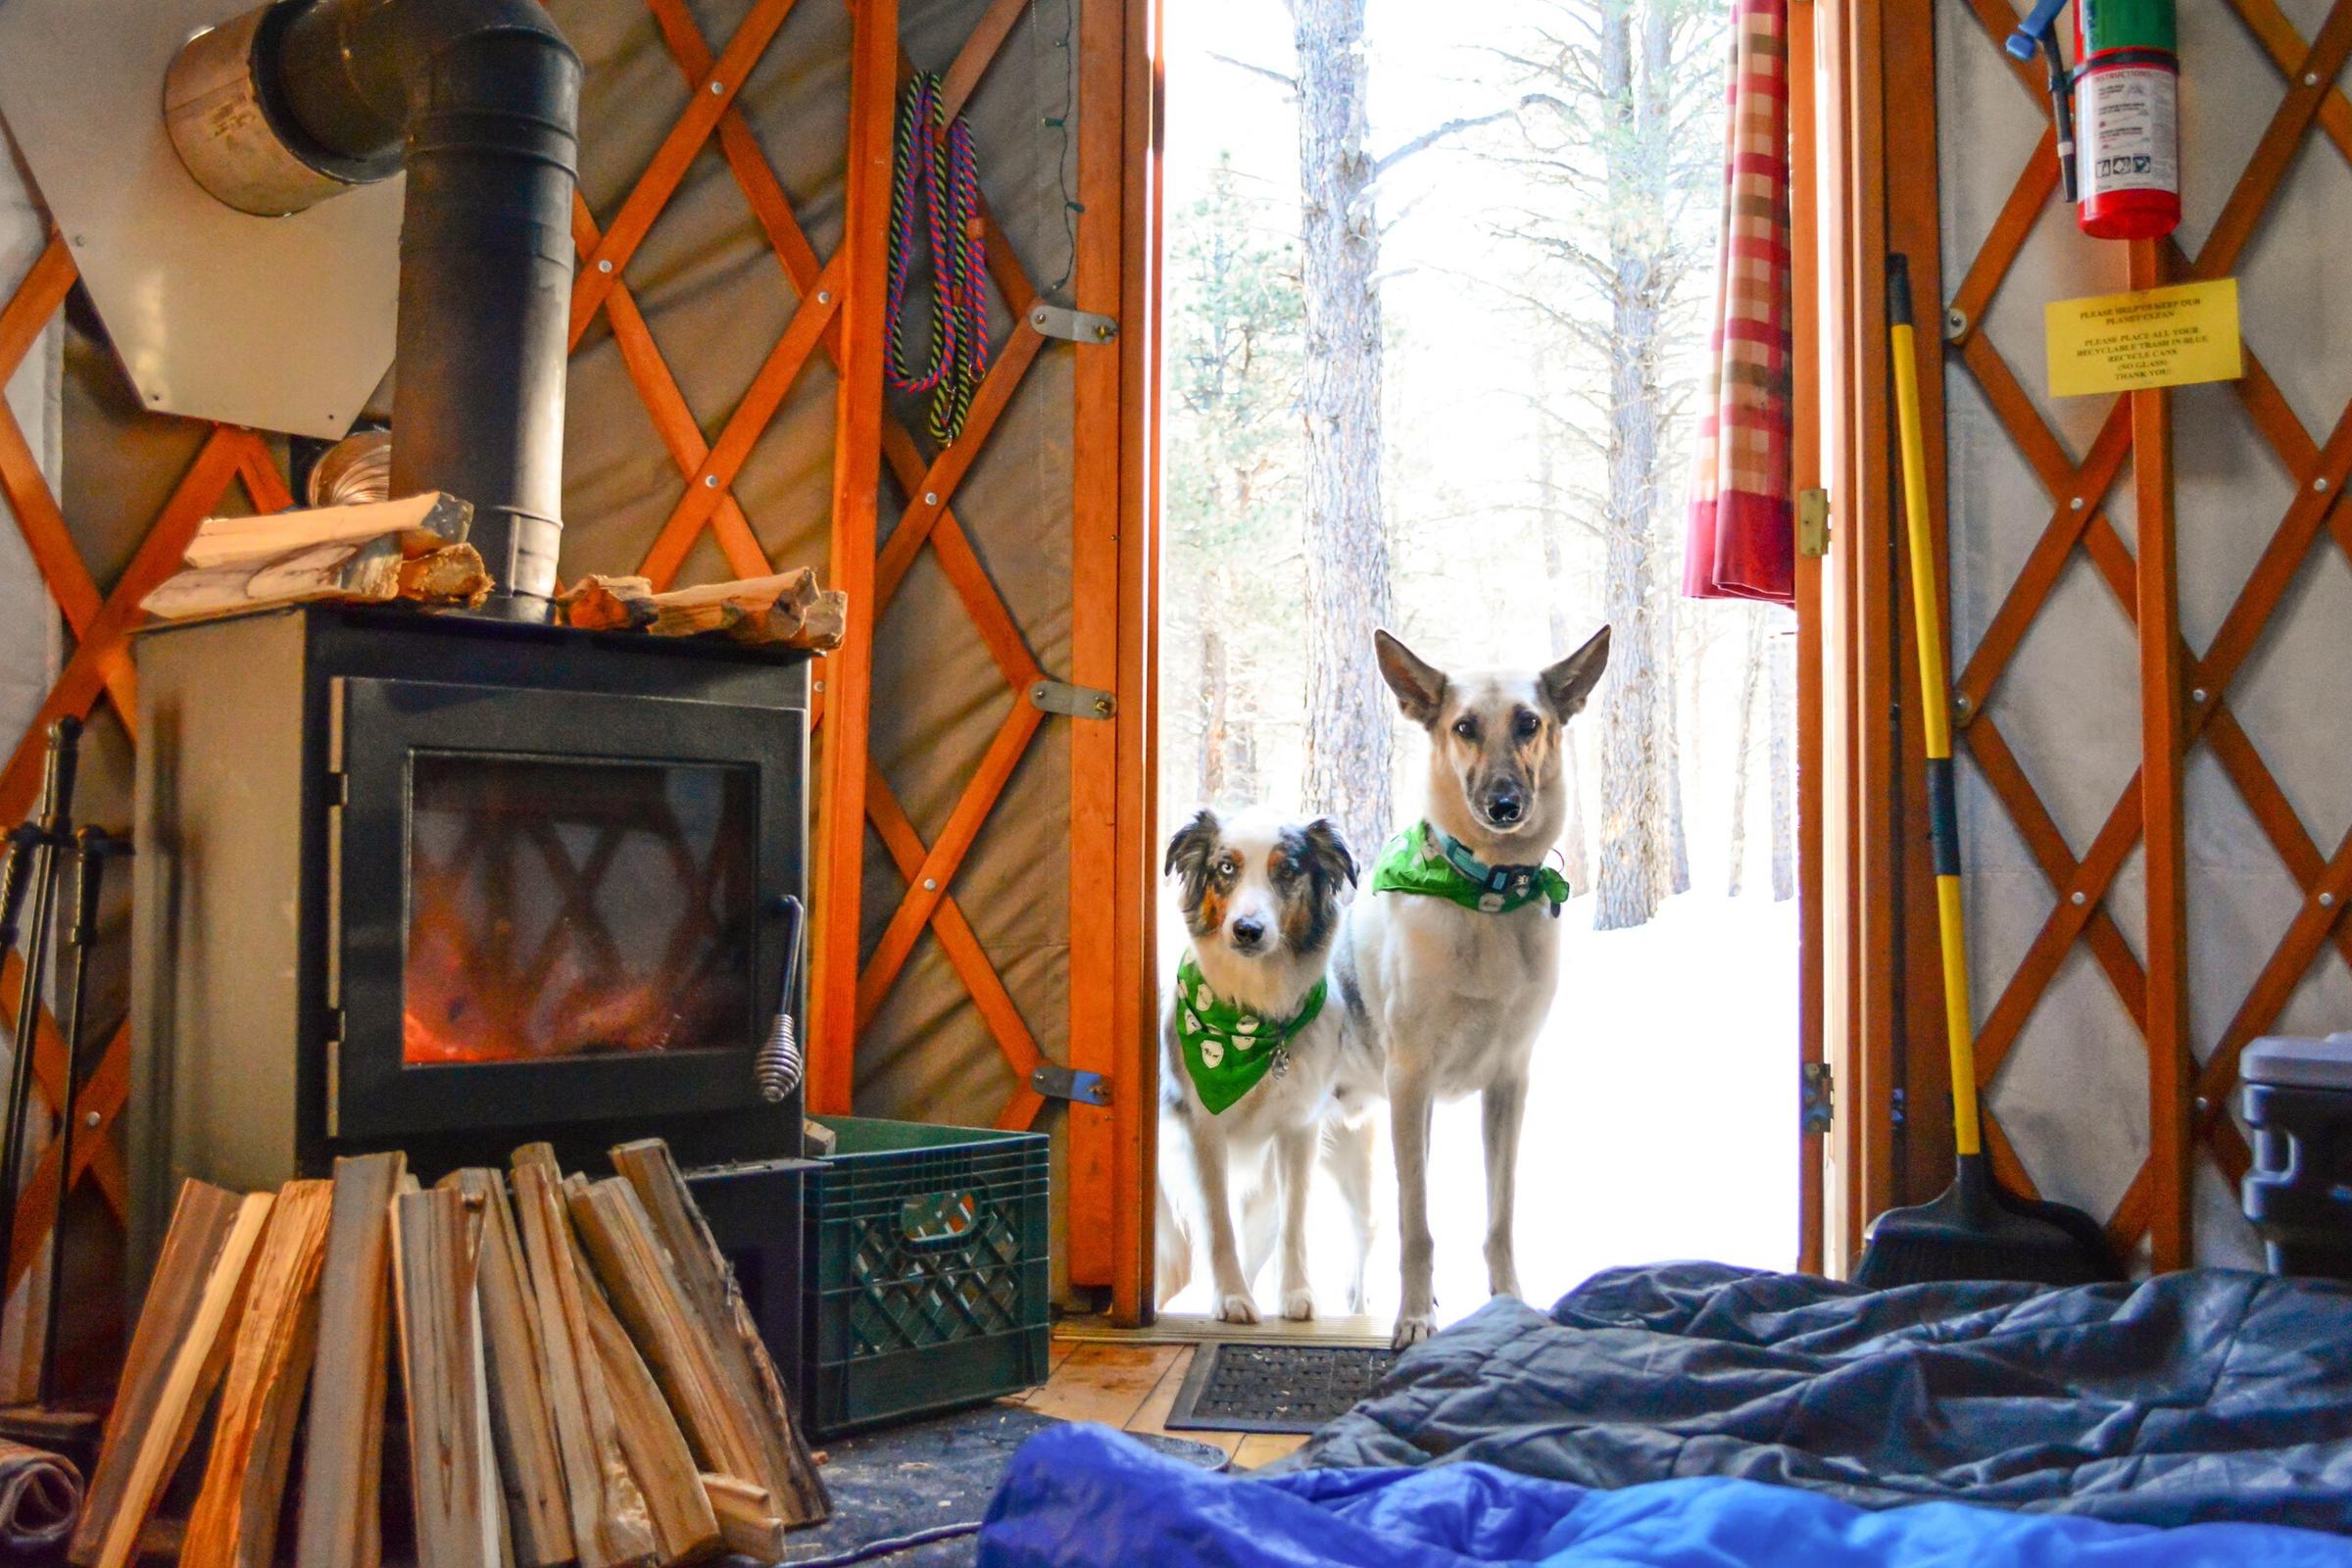 This Is Gonna Yurt: Stay Outdoors in Style at a Pet-Friendly Yurt